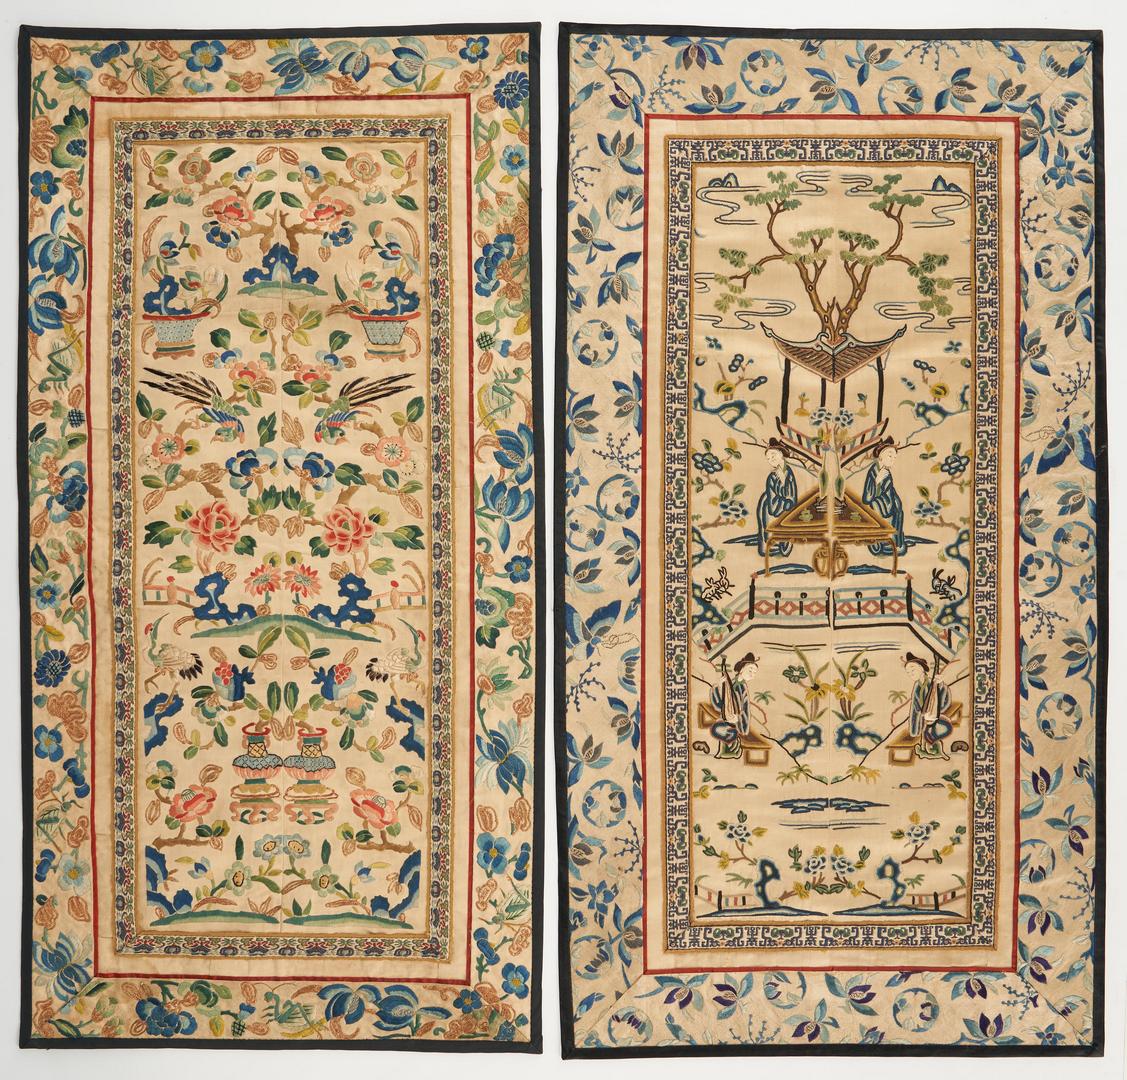 Lot 315: 2 Chinese Silk Embroidered Textiles